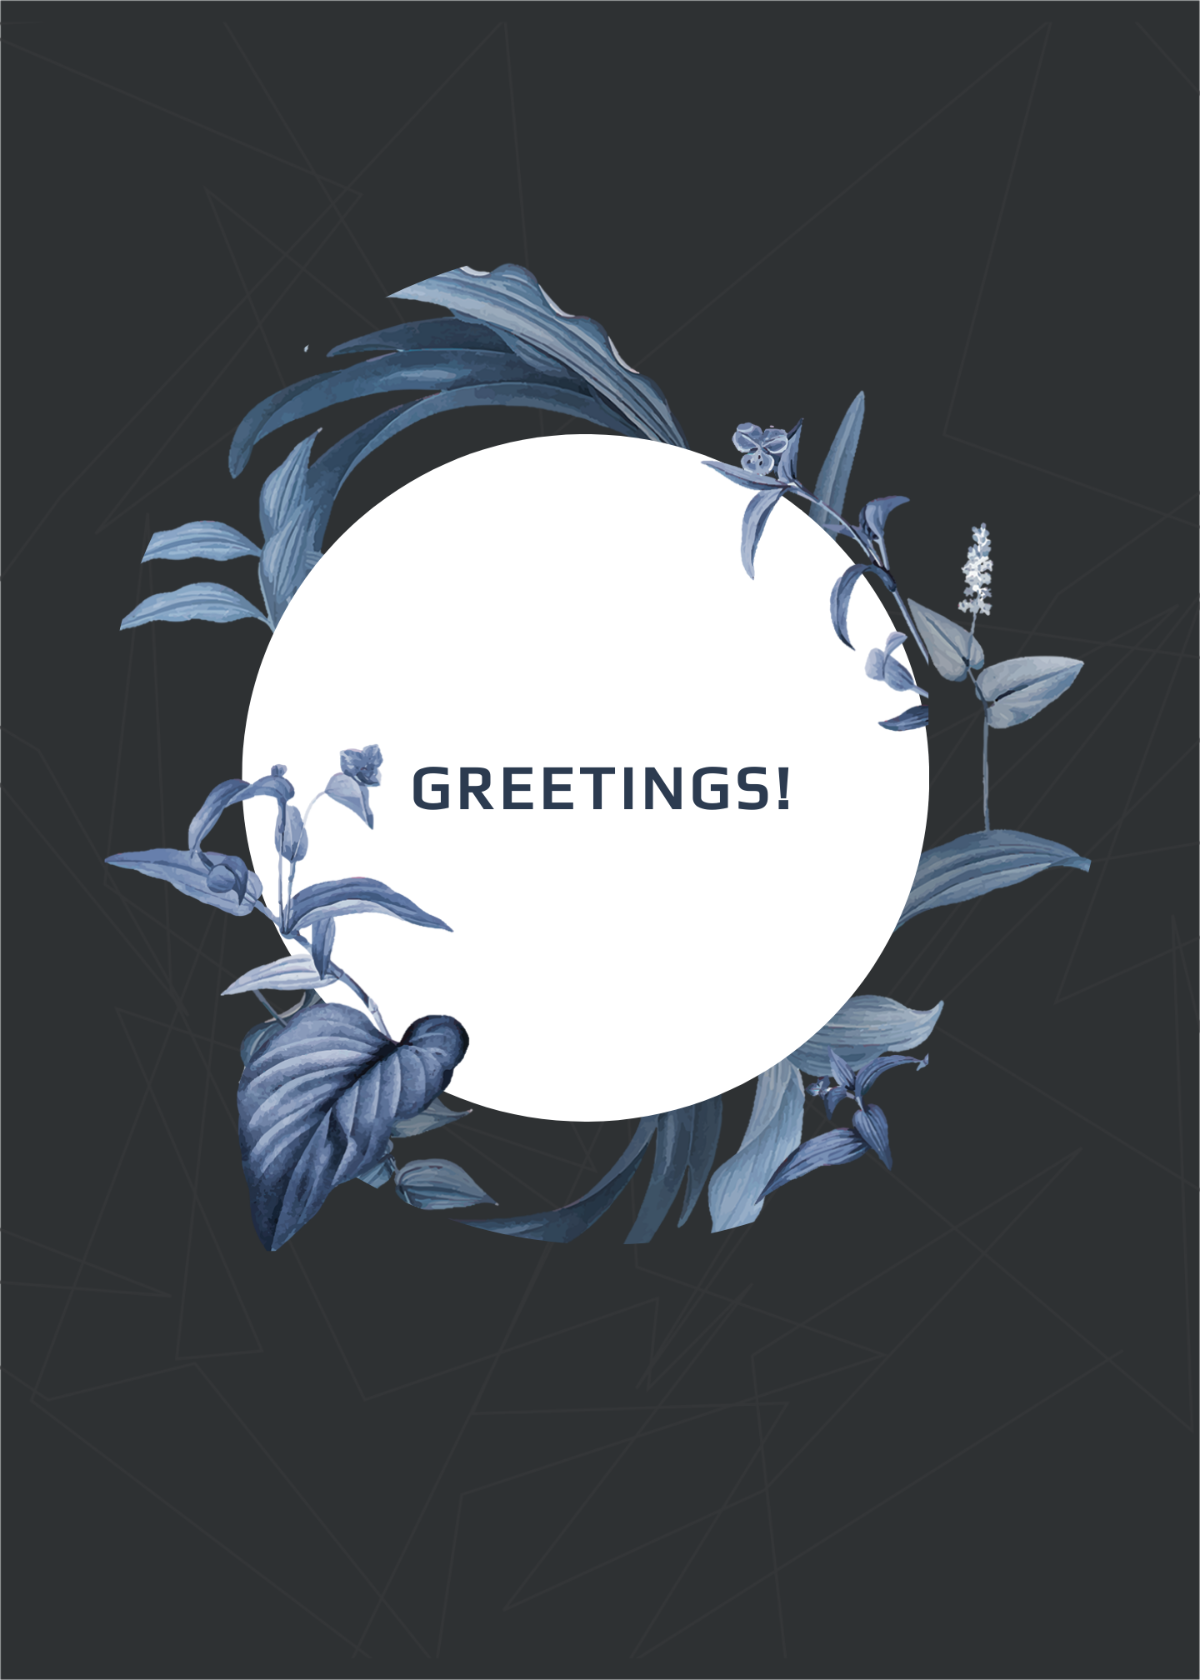 Corporate Greeting Card Template